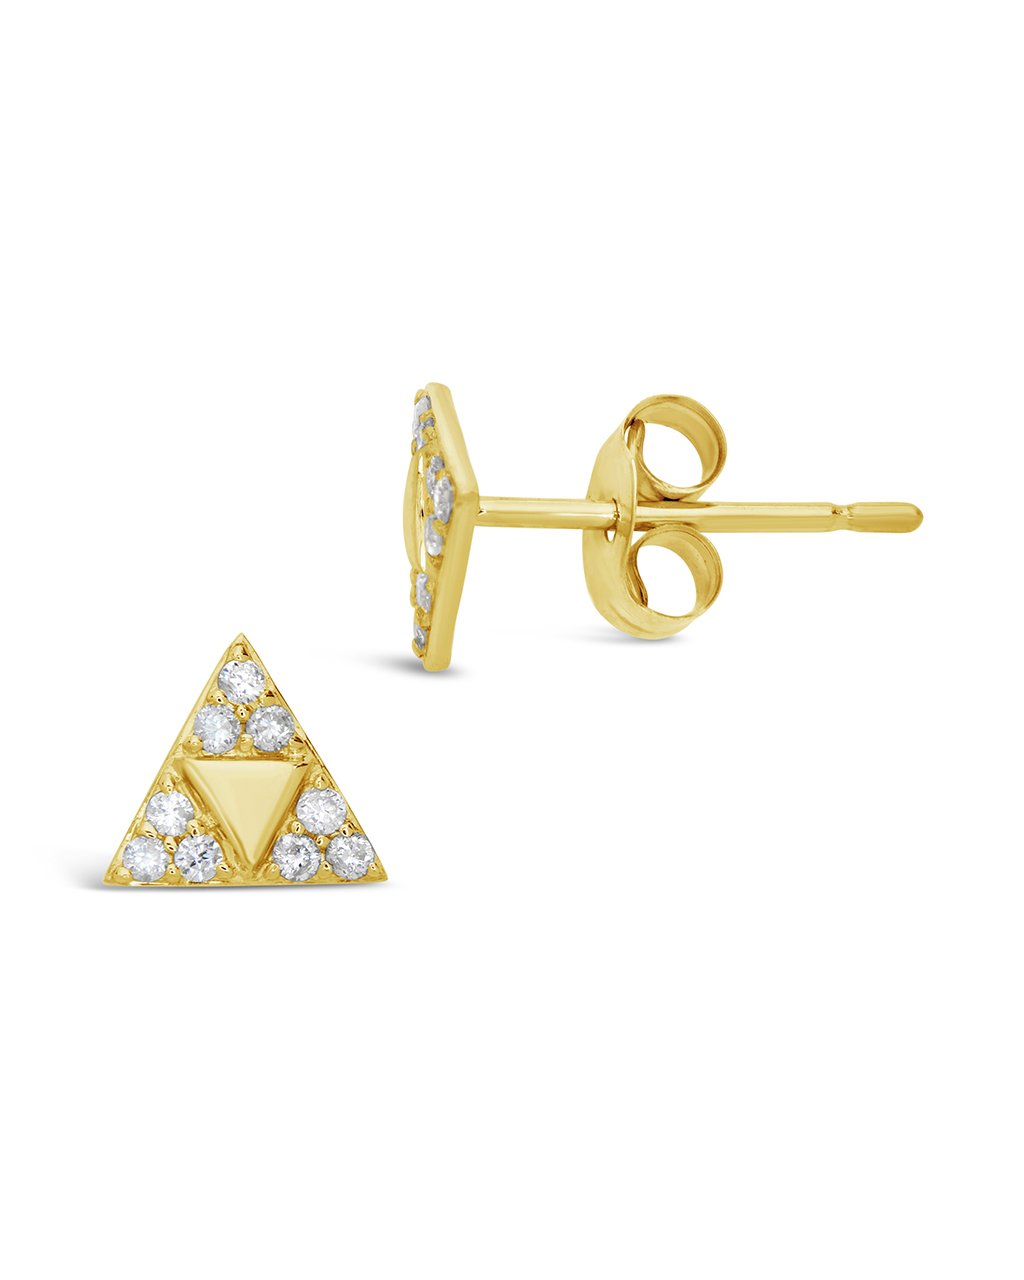 Gold Pyramid Studs, Gold Studded Straps